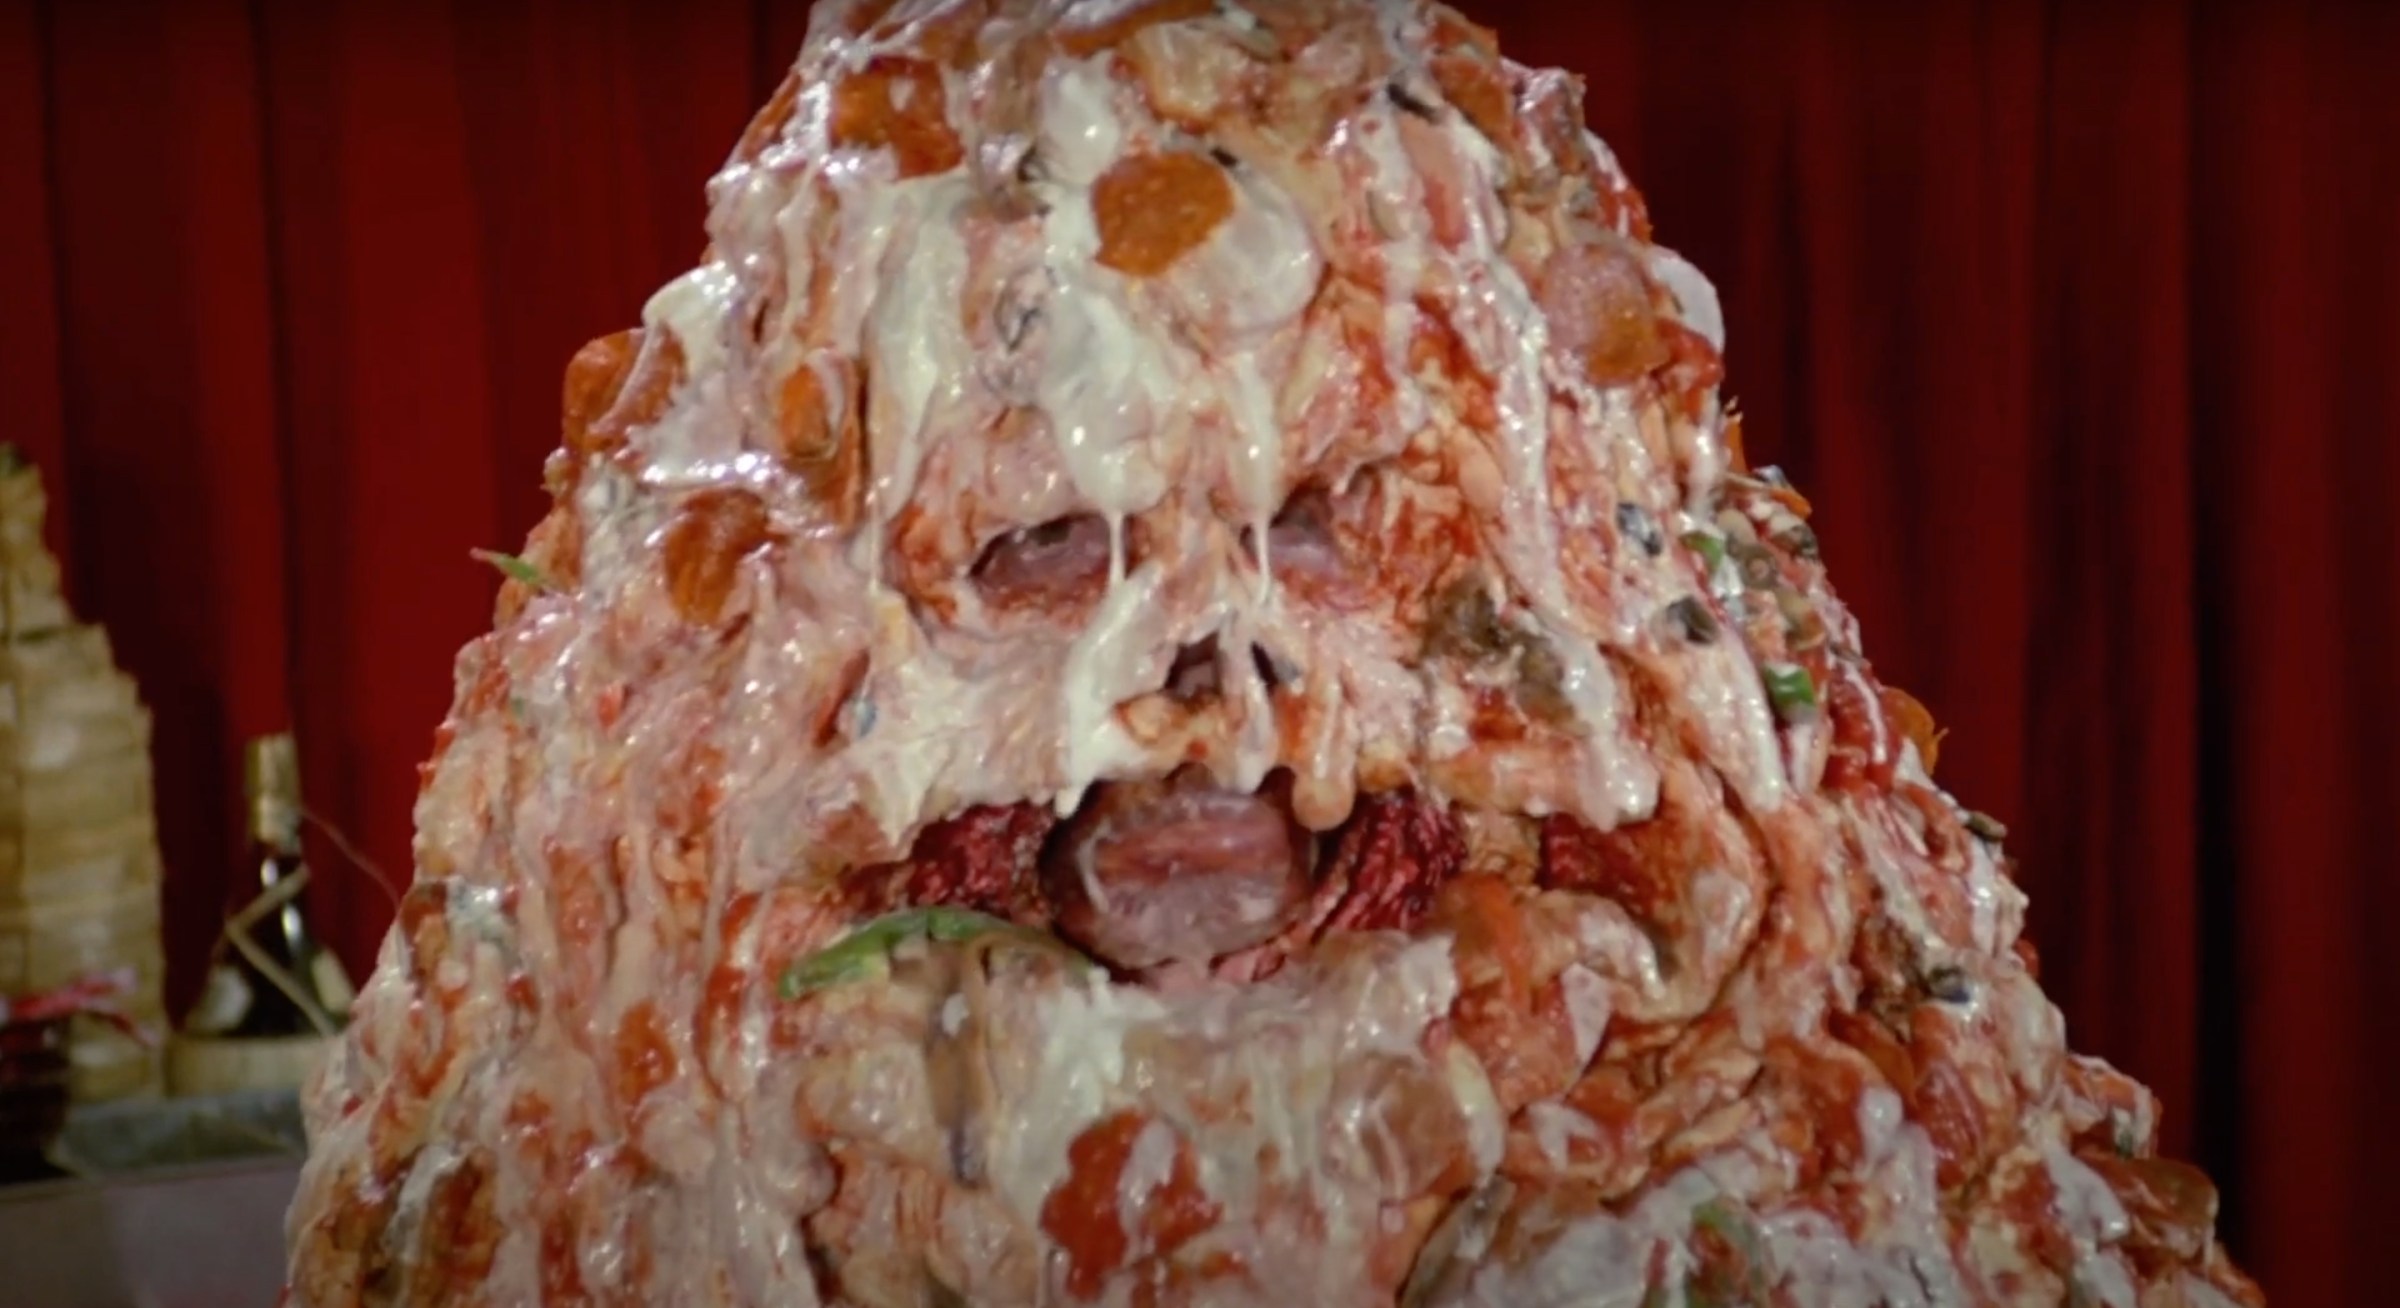 Pizza The Hutt from the movie Spaceballs.